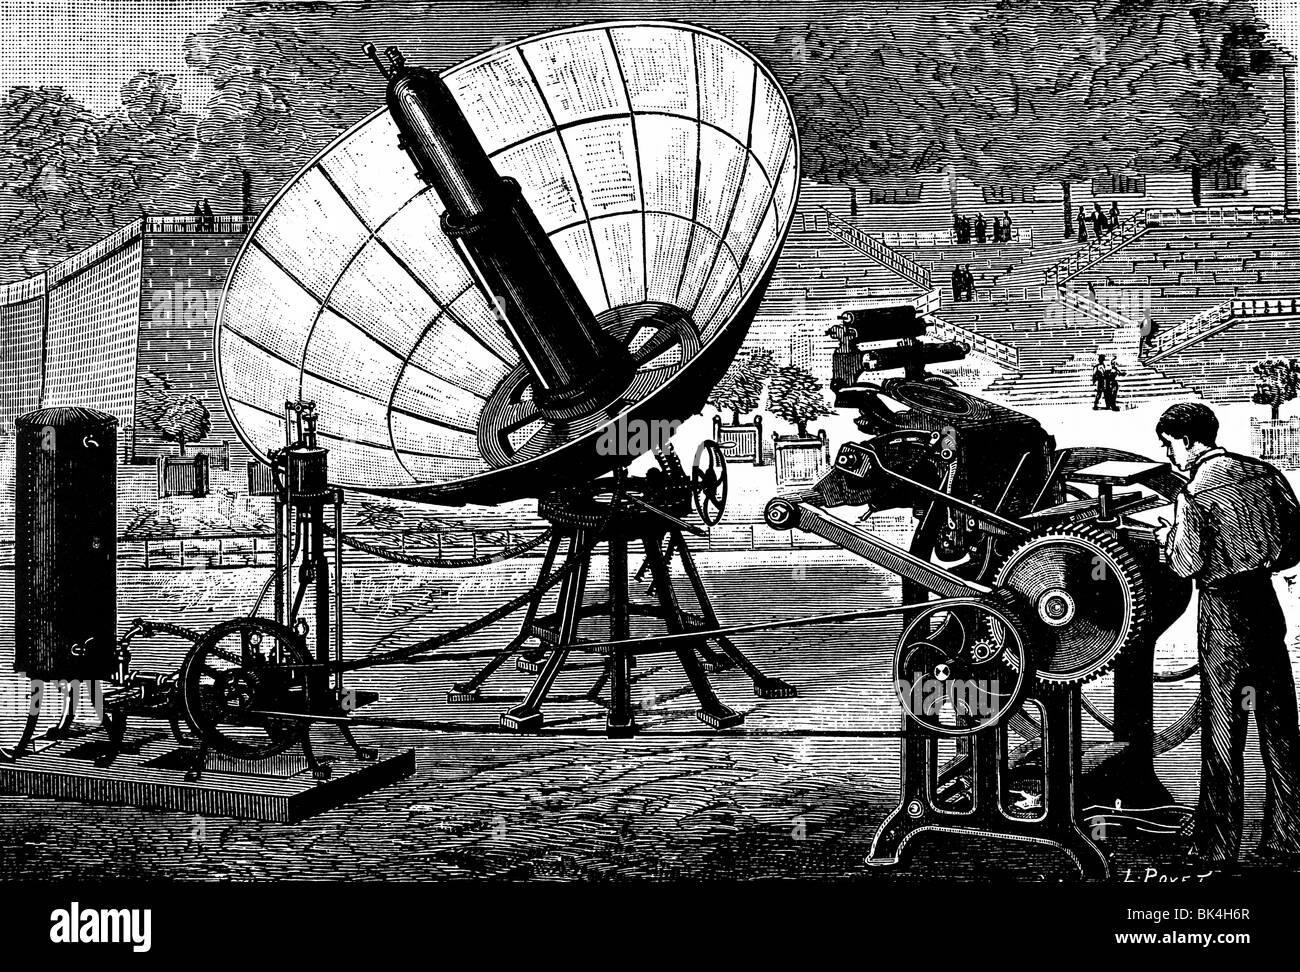 Pifre s Printing Press Driven by the Heat of the Sun s Rays, 1882 Stock Photo